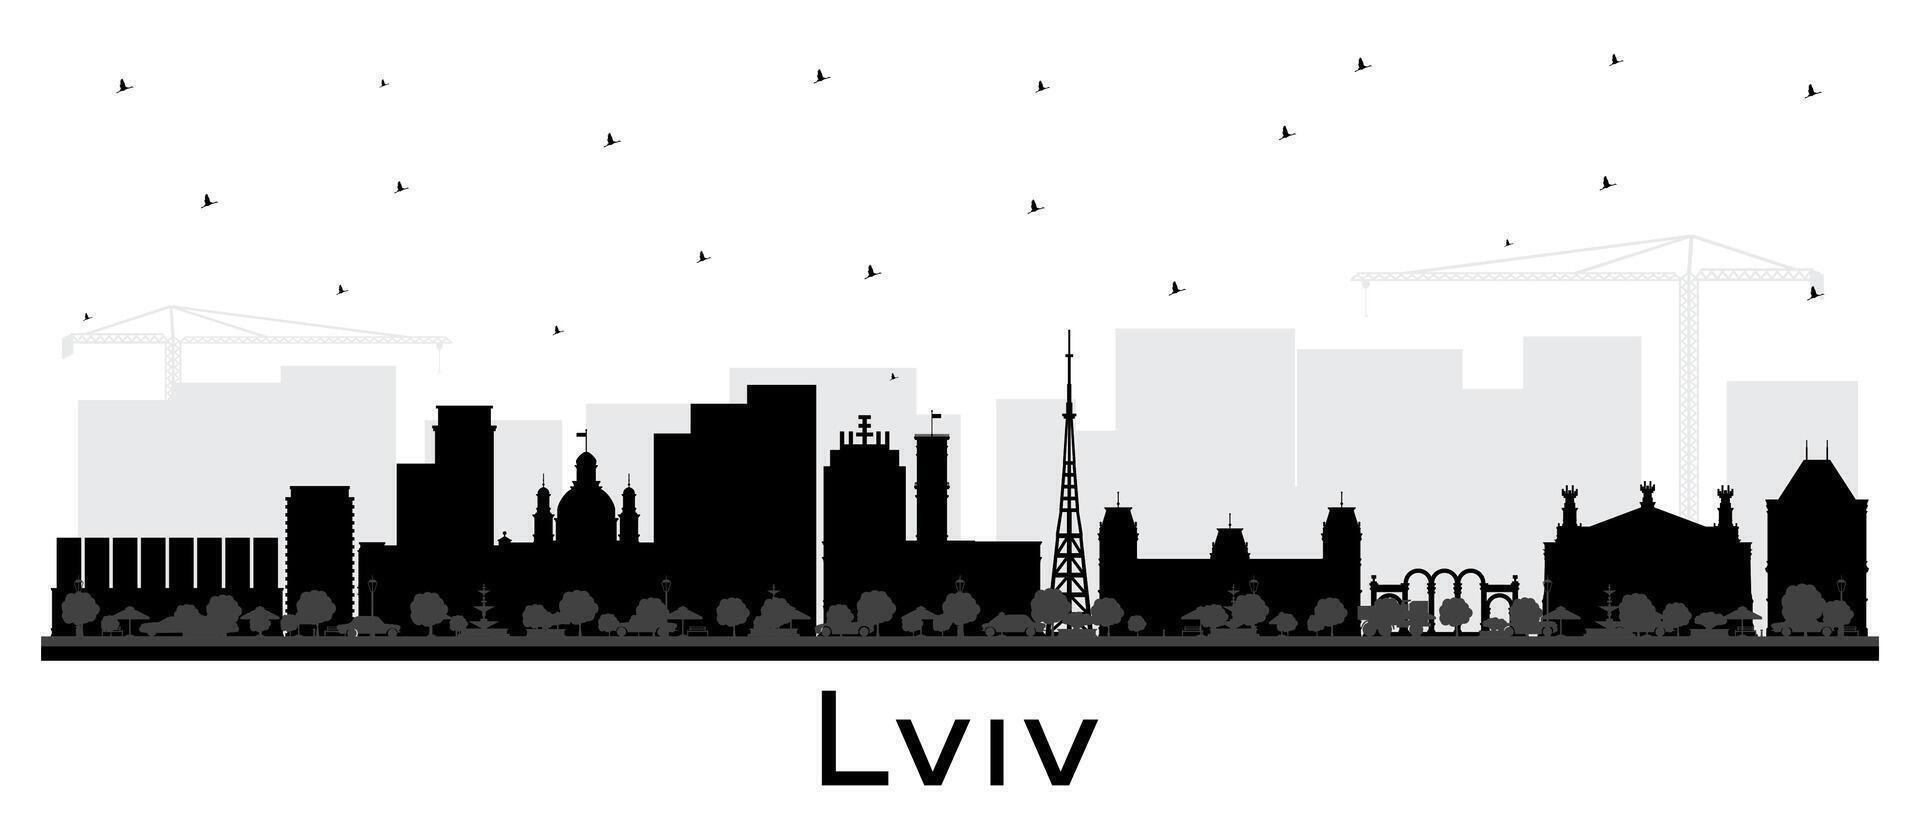 Lviv Ukraine City Skyline silhouette with black Buildings isolated on white. Lviv Cityscape with Landmarks. Business Travel and Tourism Concept with Historic Architecture. vector